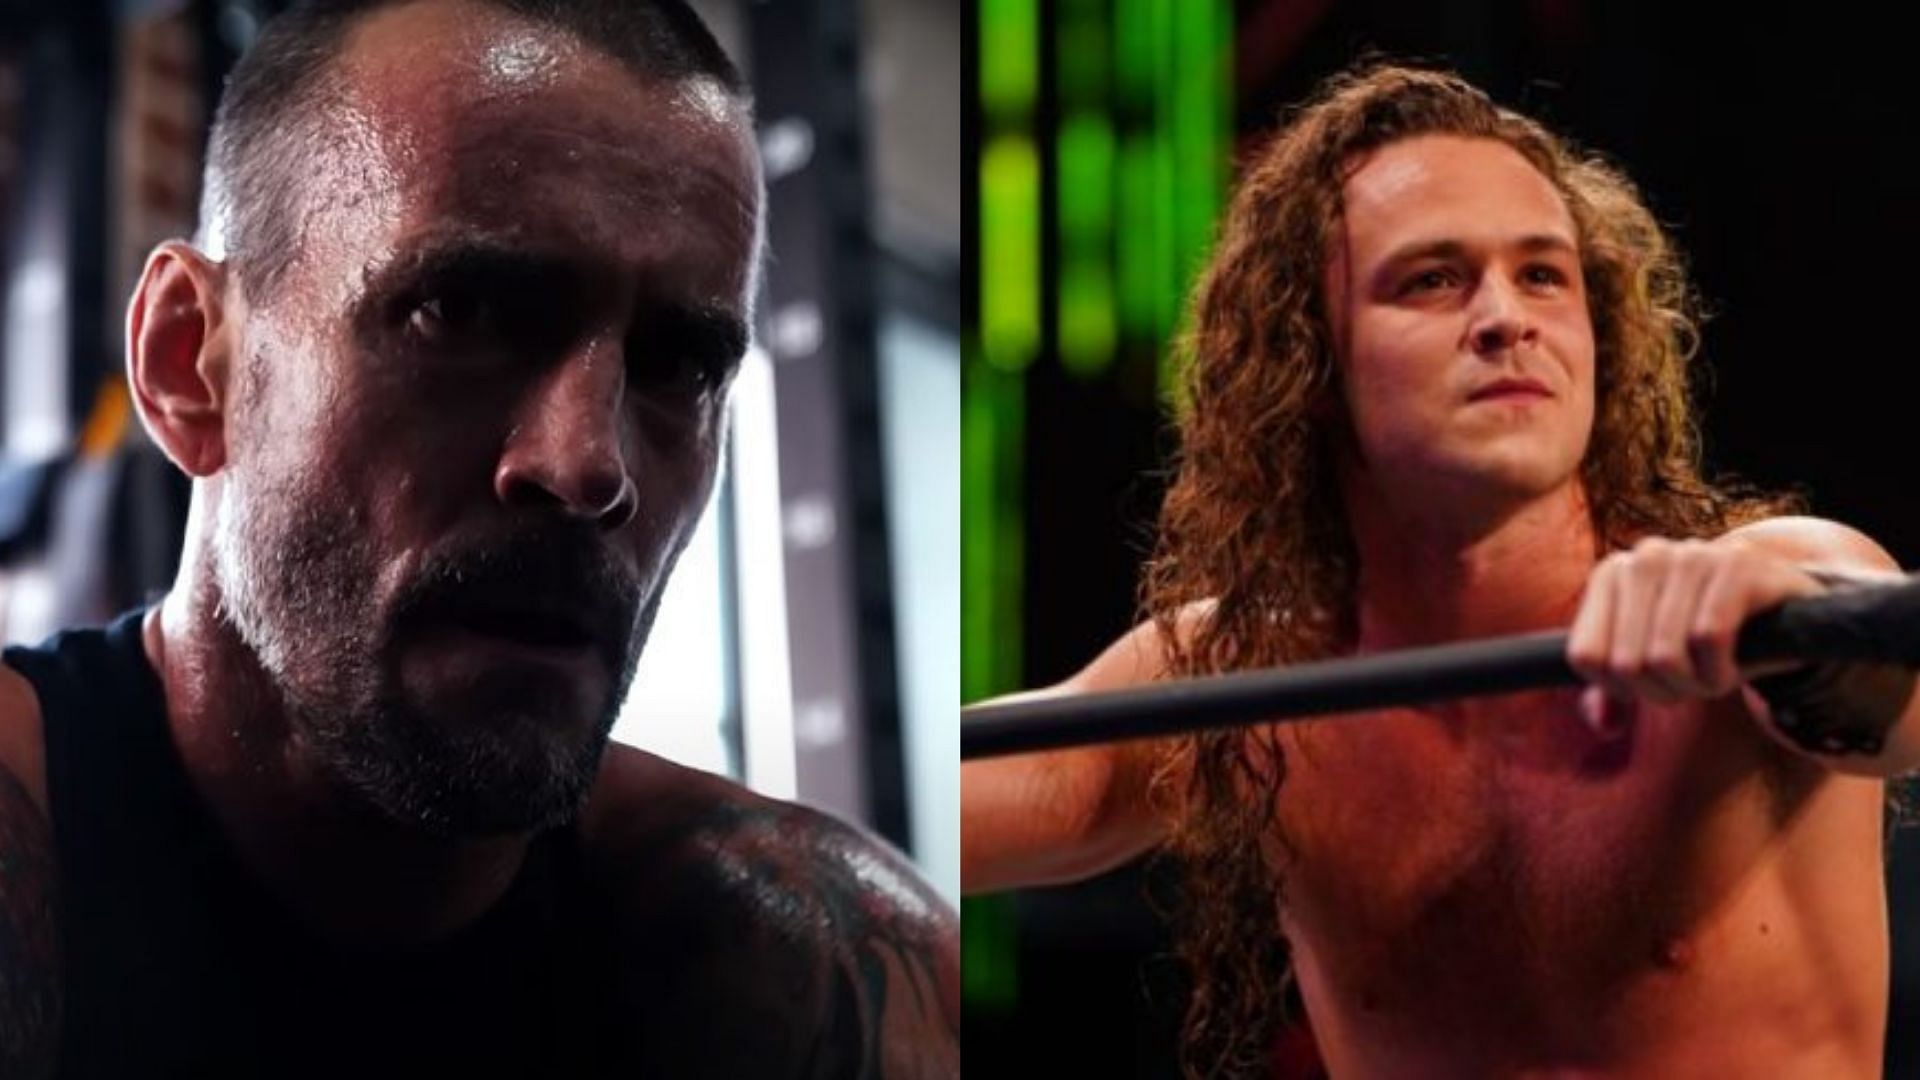 The conflict between CM Punk and Jack Perry has created more drama in AEW